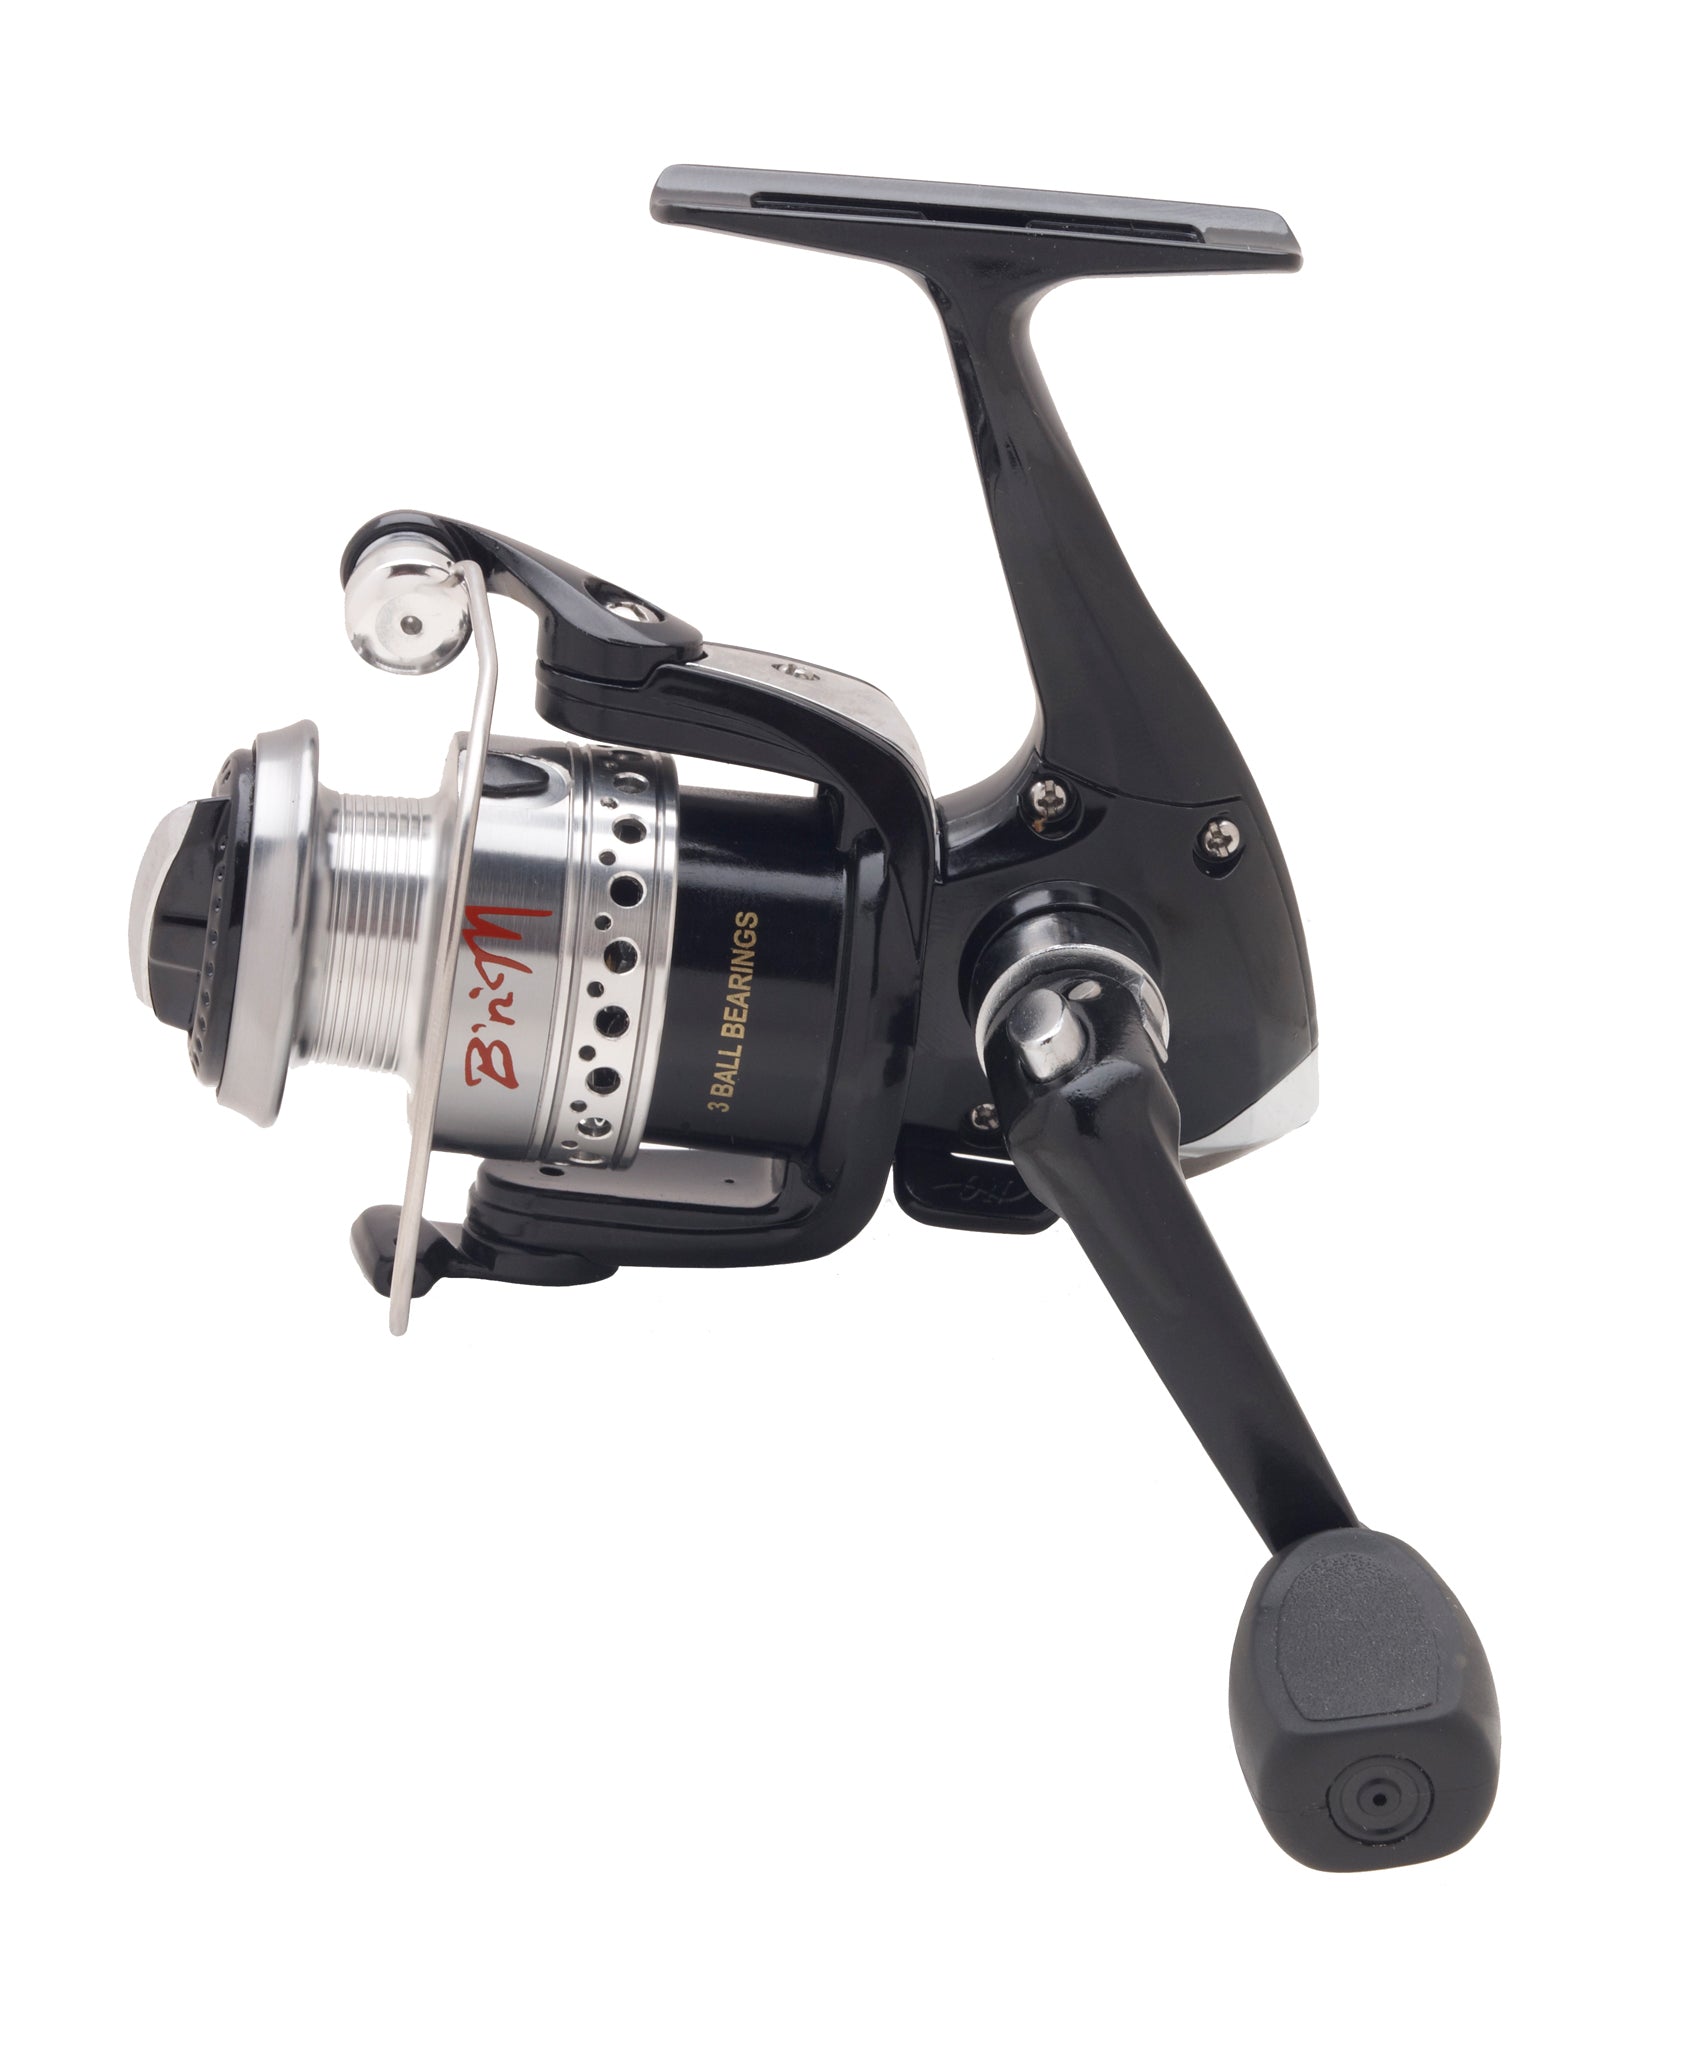 2 Pieces Shakespeare Crappie Hunter Spinning Reels India